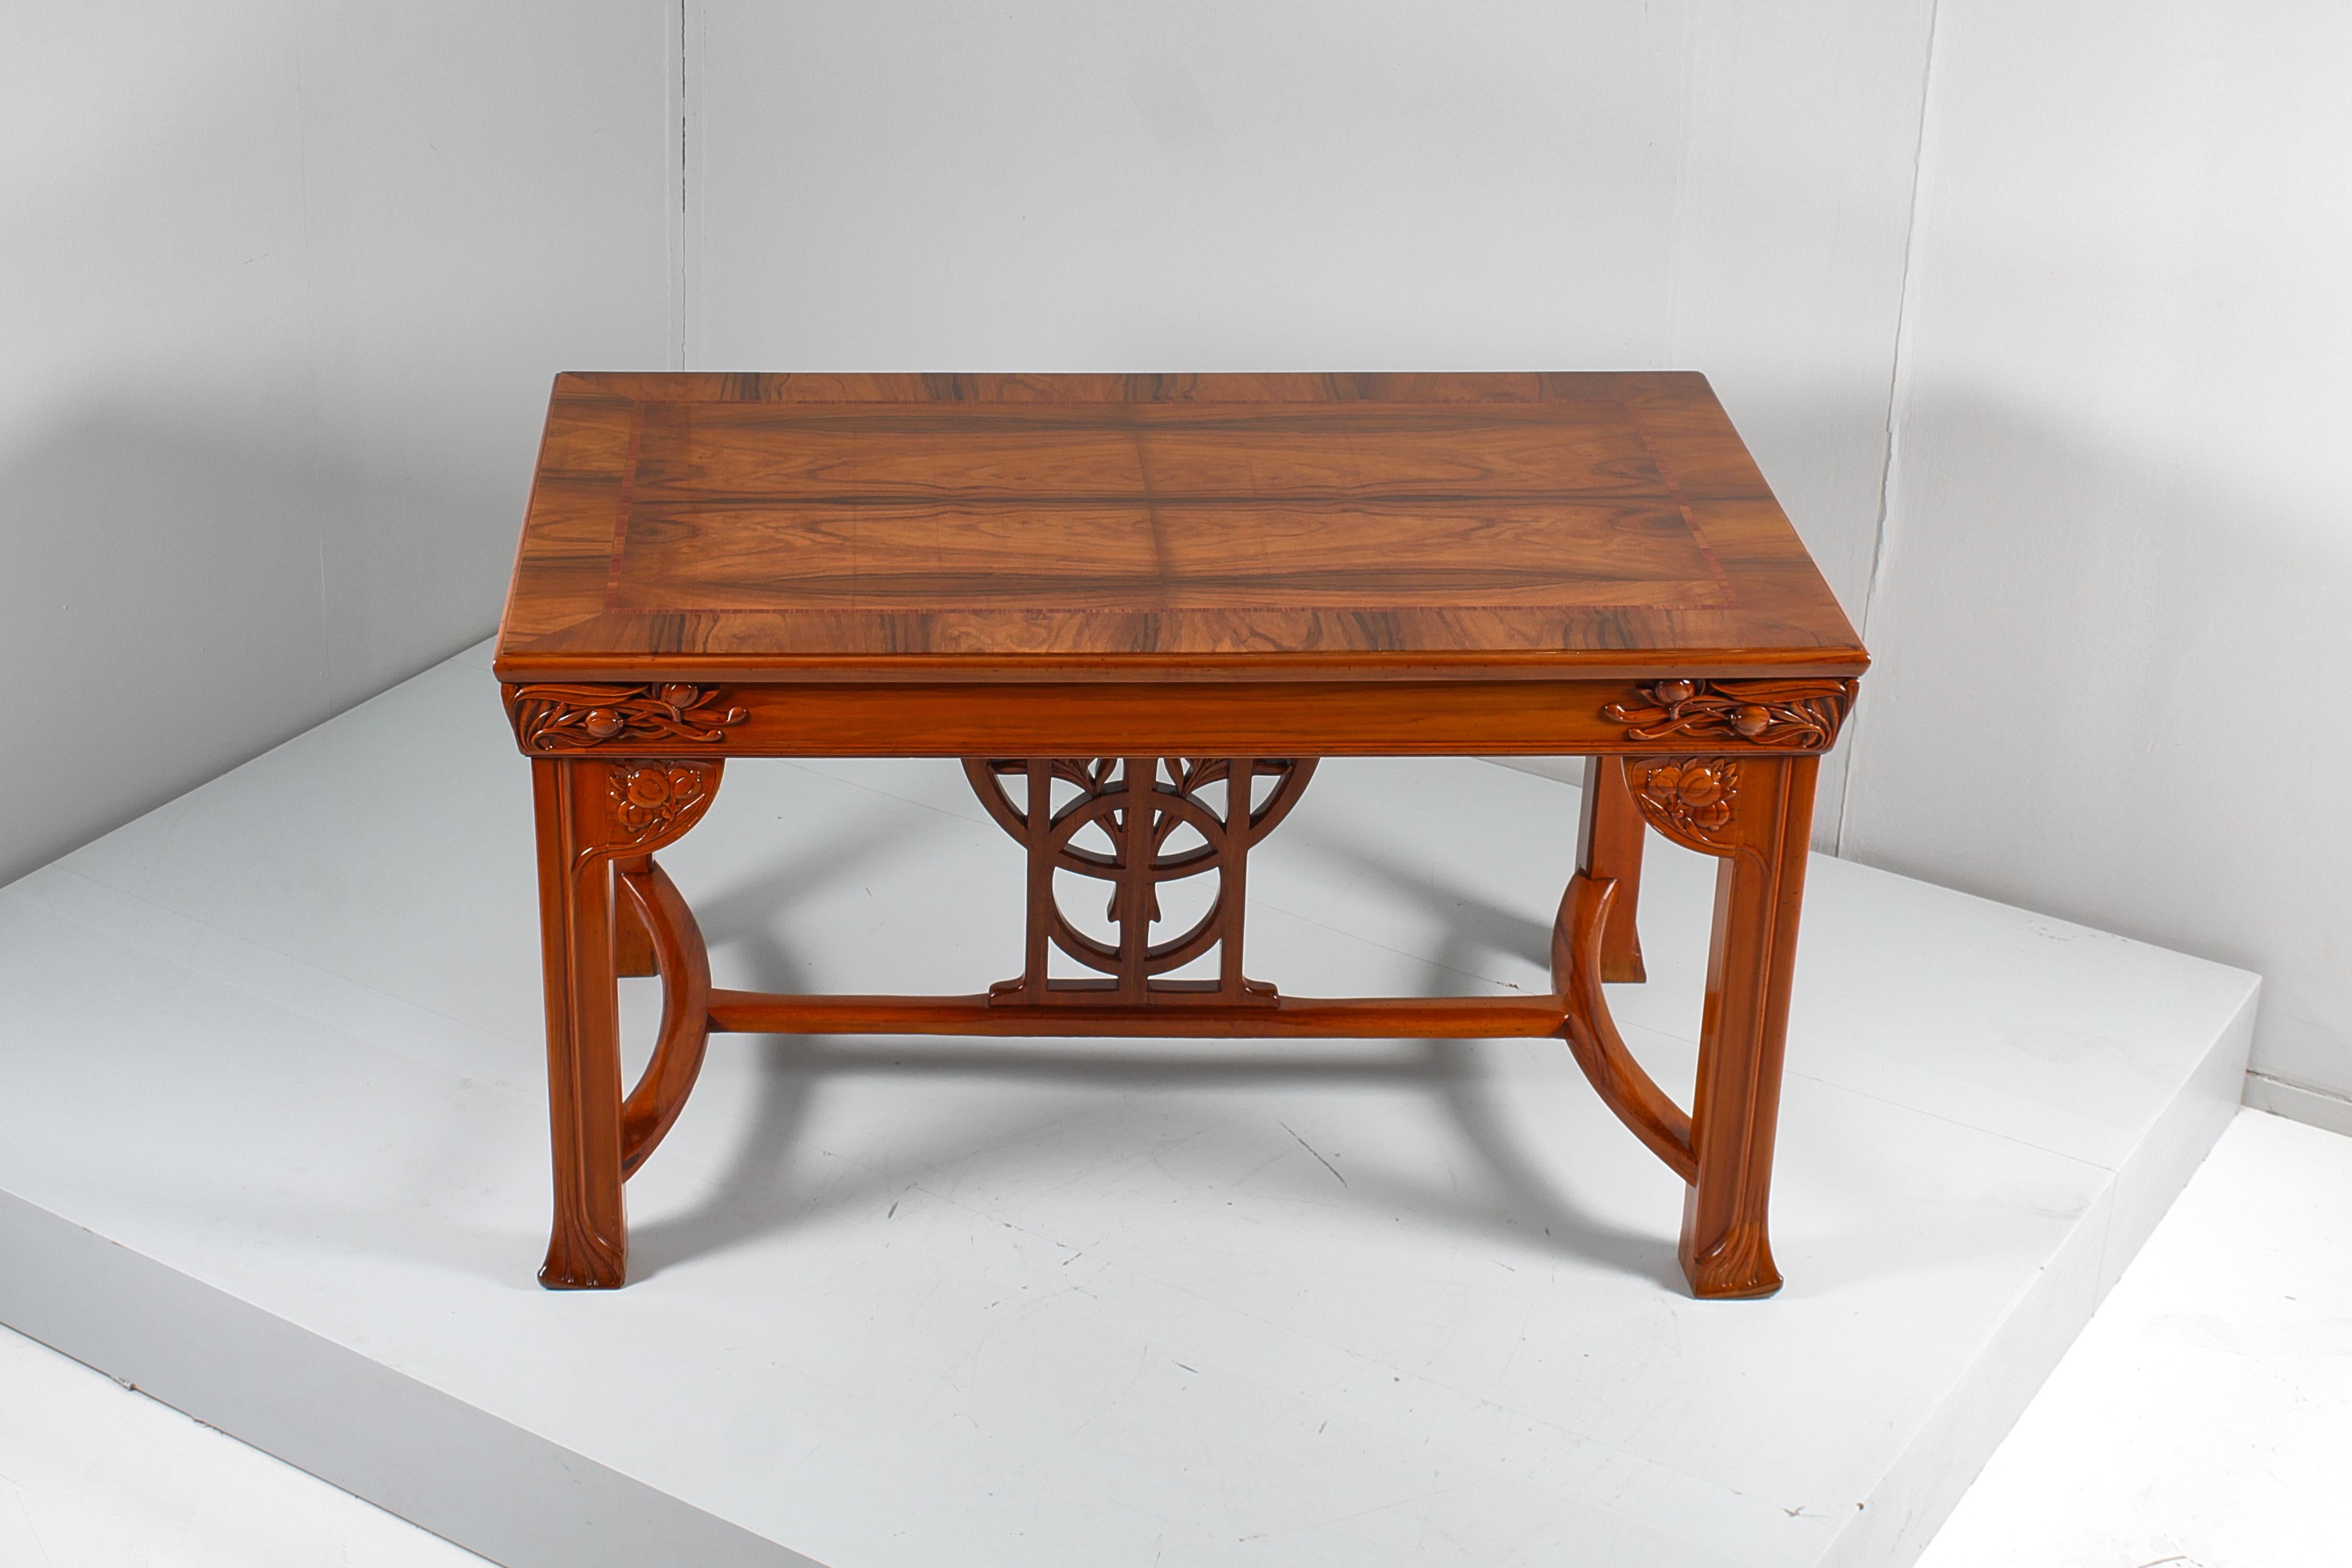 Italian Art Nouveau V. Ducrot Restored Inlaid and Carved Wood Table 1900 Italy For Sale